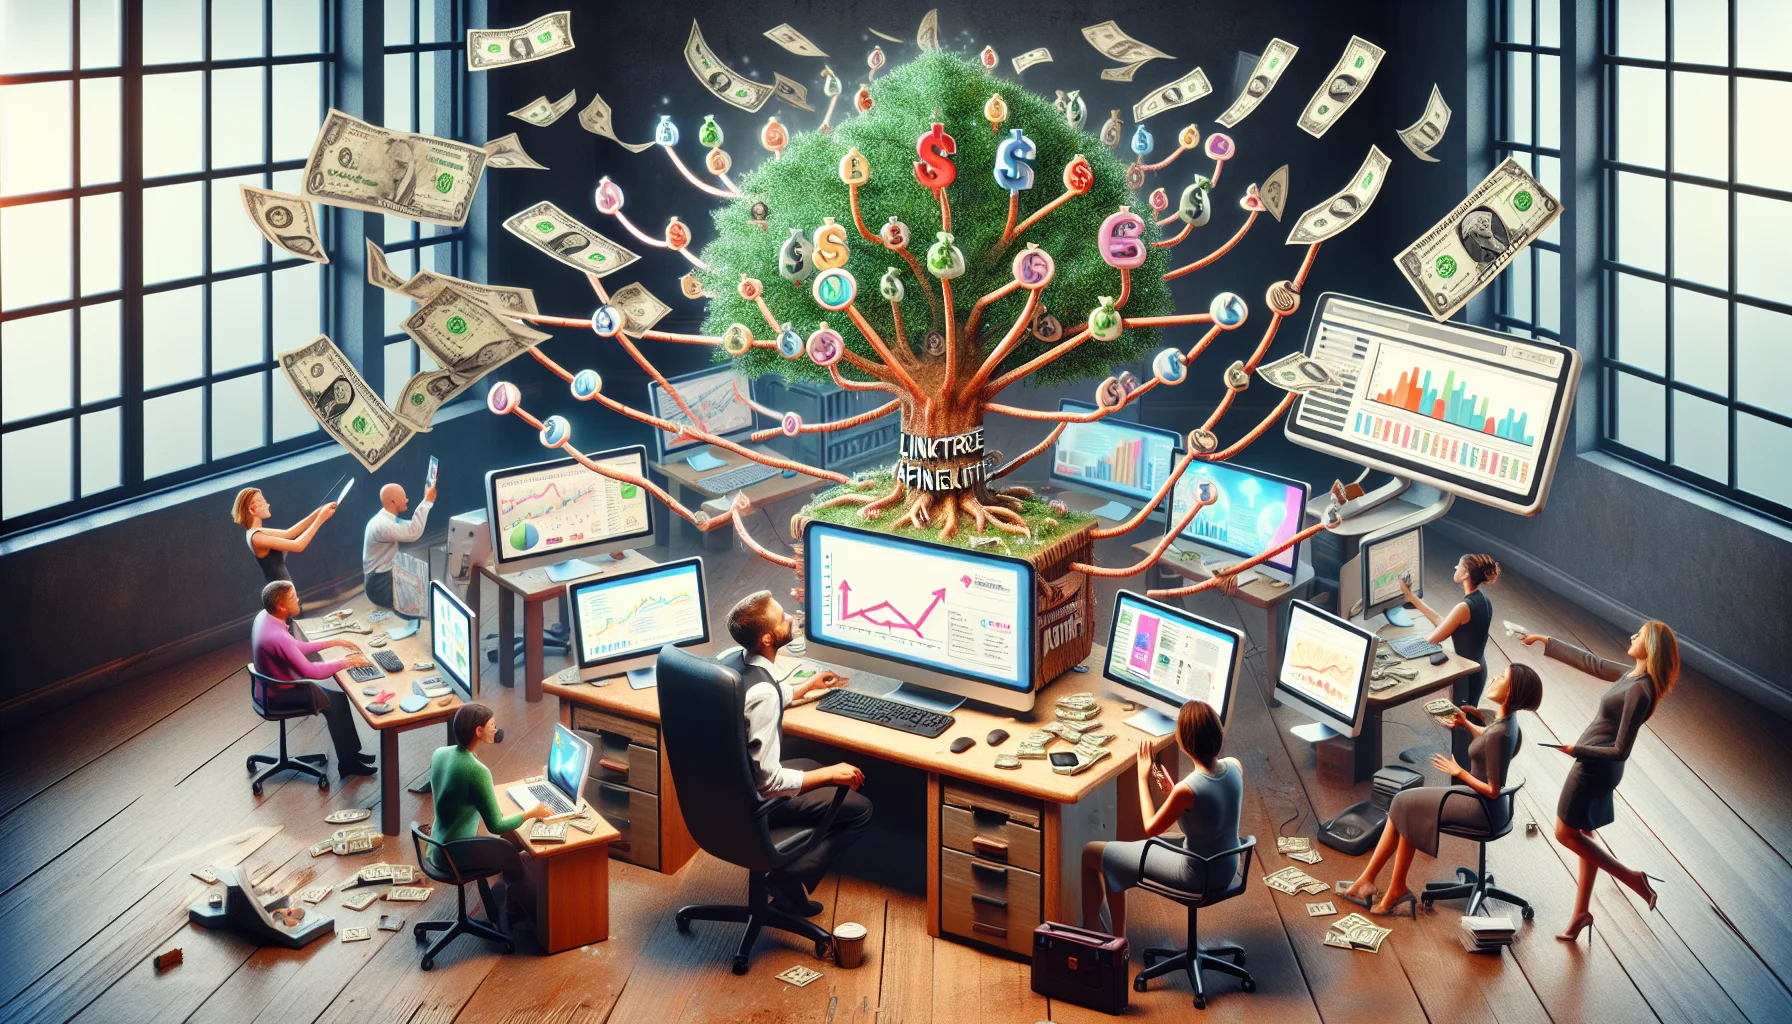 Imagine a whimsical, realistic scene related to online money-making. At the center is the concept of the Linktree affiliate program. Visualize a desk cluttered with computer monitors, each showing a different way to earn cash via internet. Perhaps there's a screen with real-time profits rising, another with a 3D digital tree composed of links branching out (symbolizing Linktree), and another displaying an engaging online course led by an enthusiastic Caucasian woman. Dollar bills are seen occasionally drifting down, representing online income. The atmosphere is lively, yet productive and alluring.